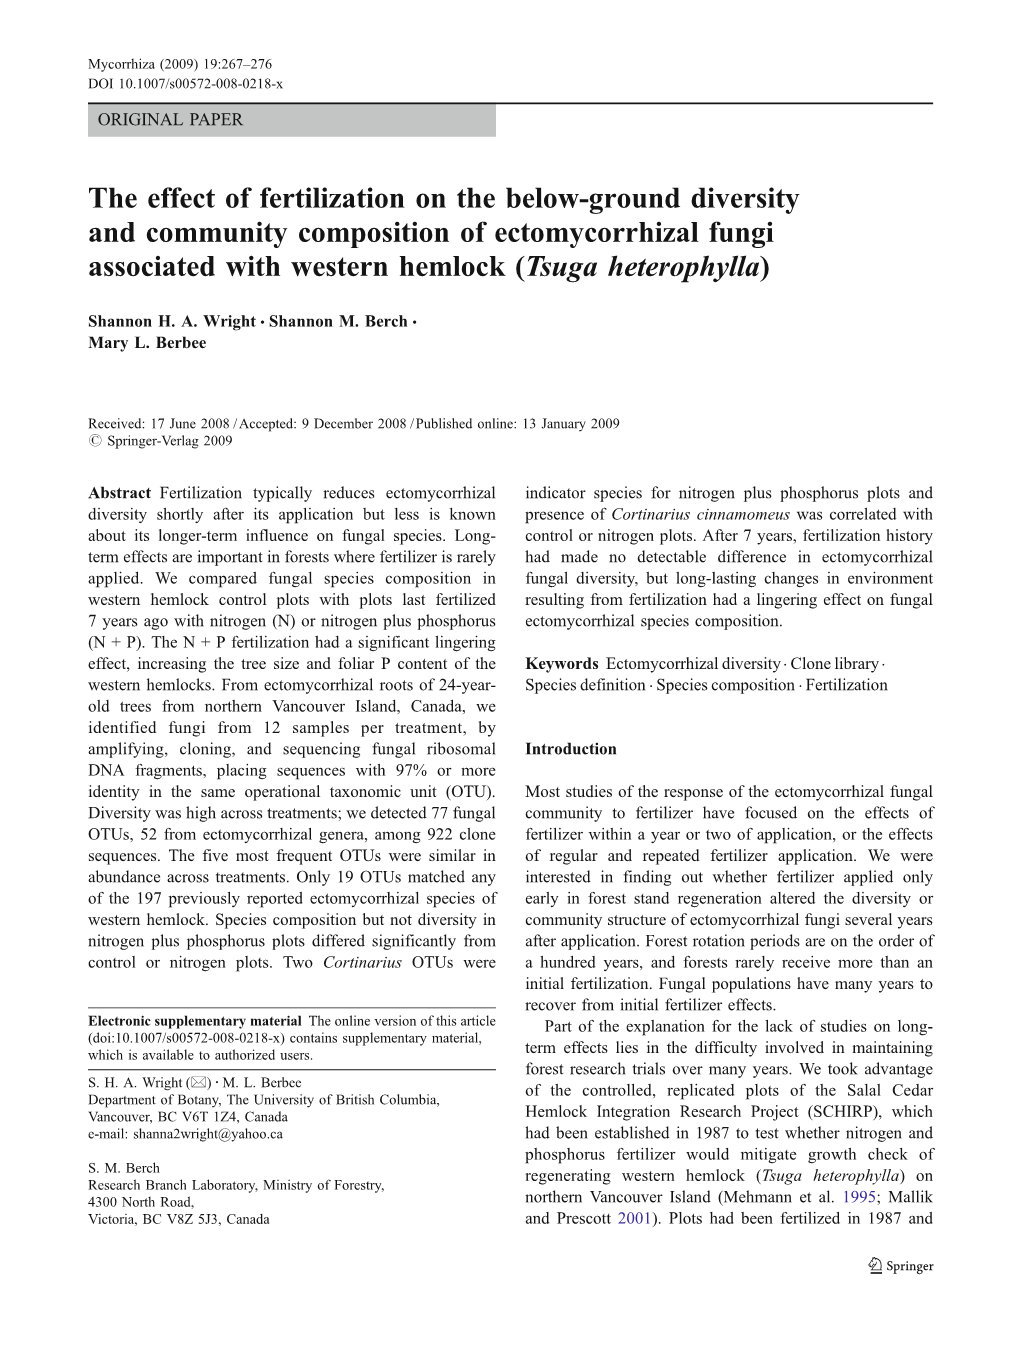 The Effect of Fertilization on the Below-Ground Diversity and Community Composition of Ectomycorrhizal Fungi Associated with Western Hemlock (Tsuga Heterophylla)